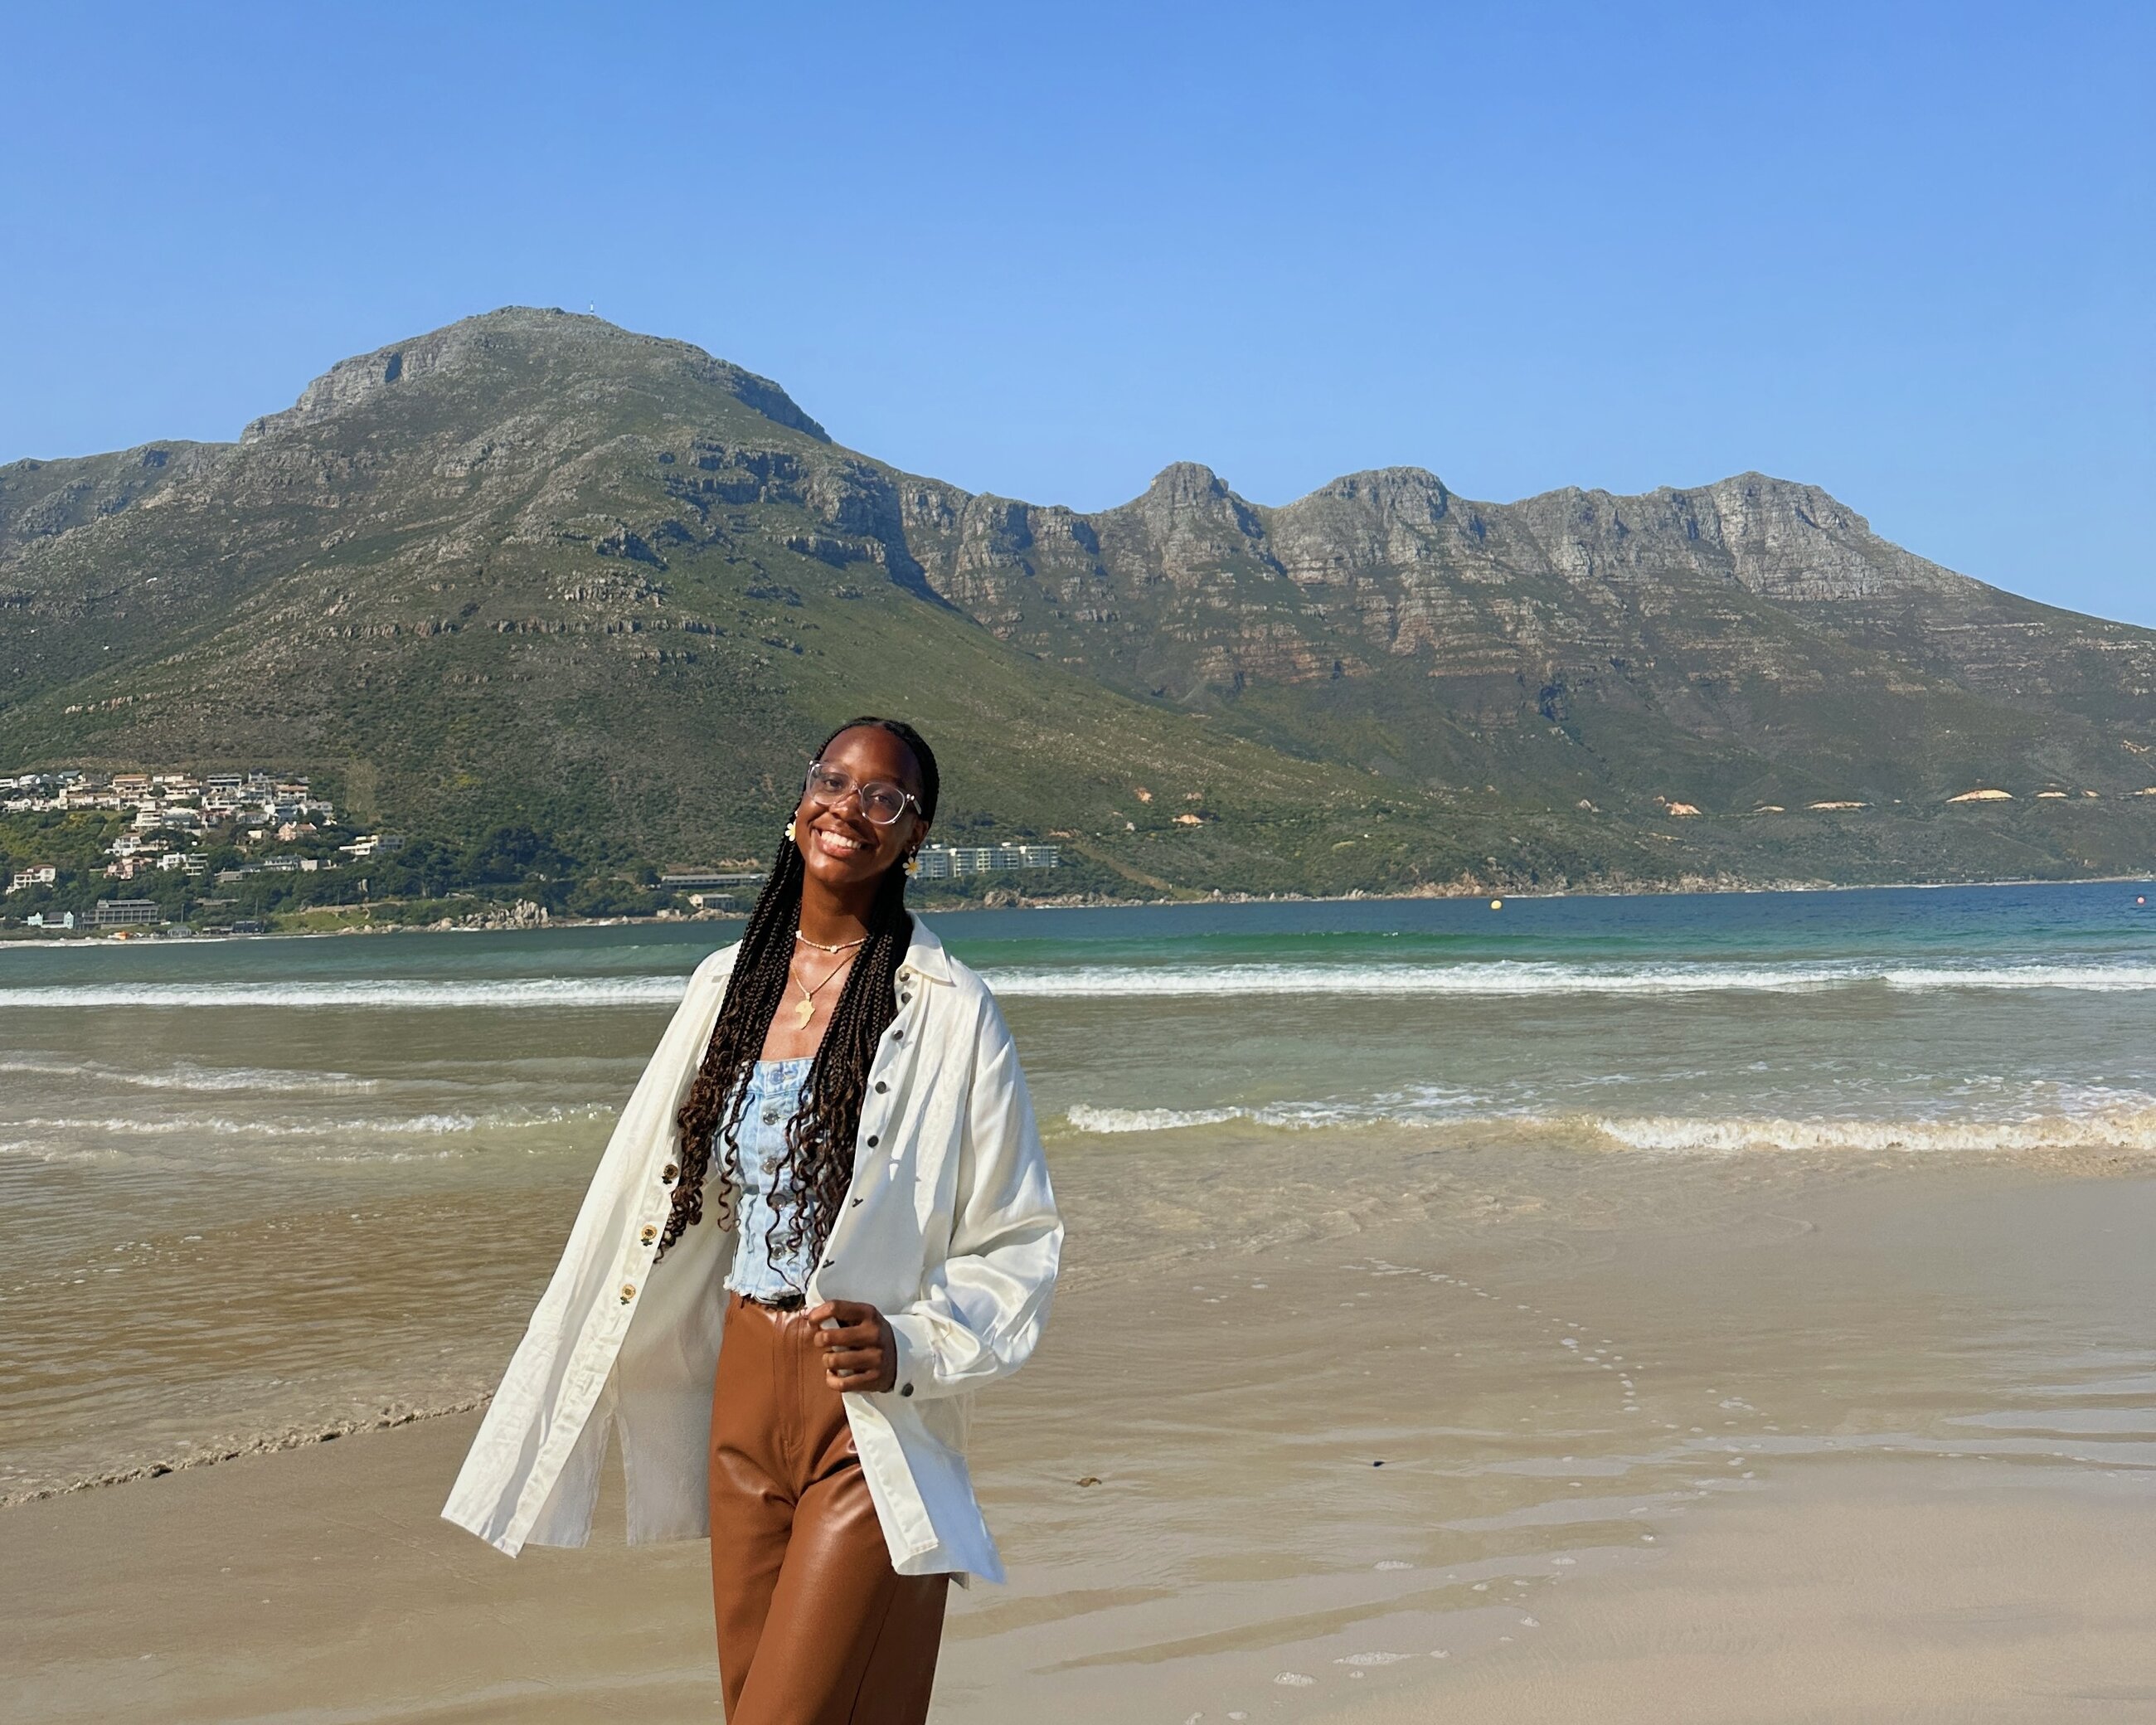 Enjoying a day at the beach in Cape Town!